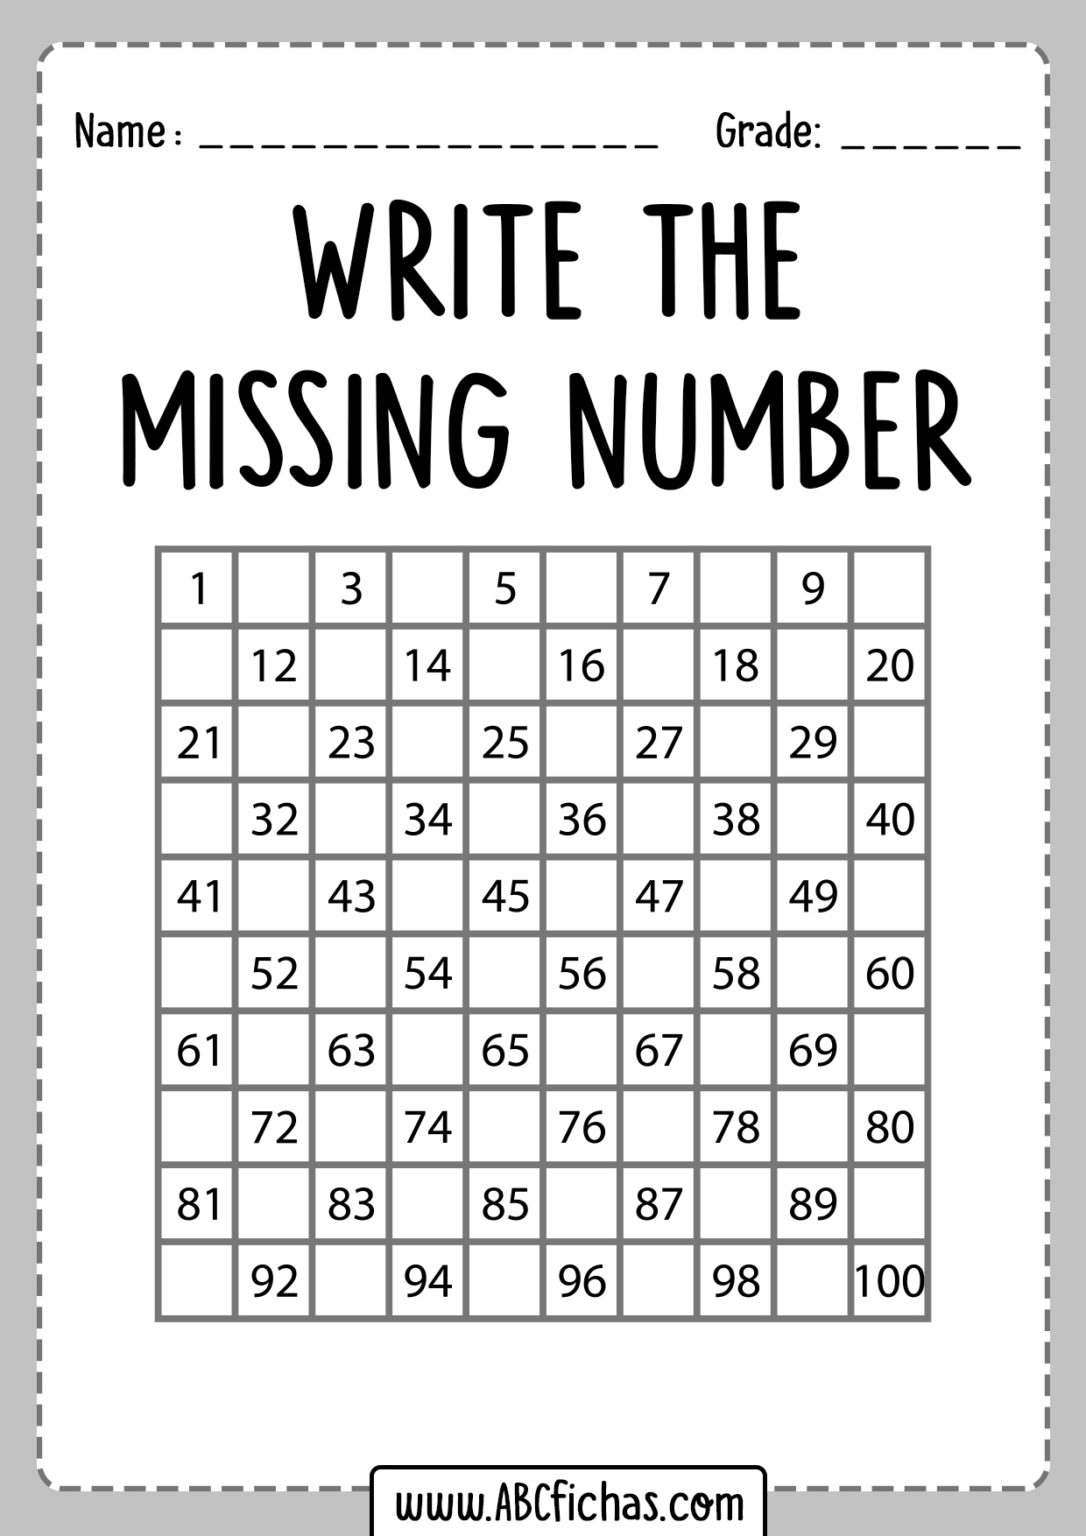 write-the-missing-number-worksheets-for-first-grade-abc-fichas